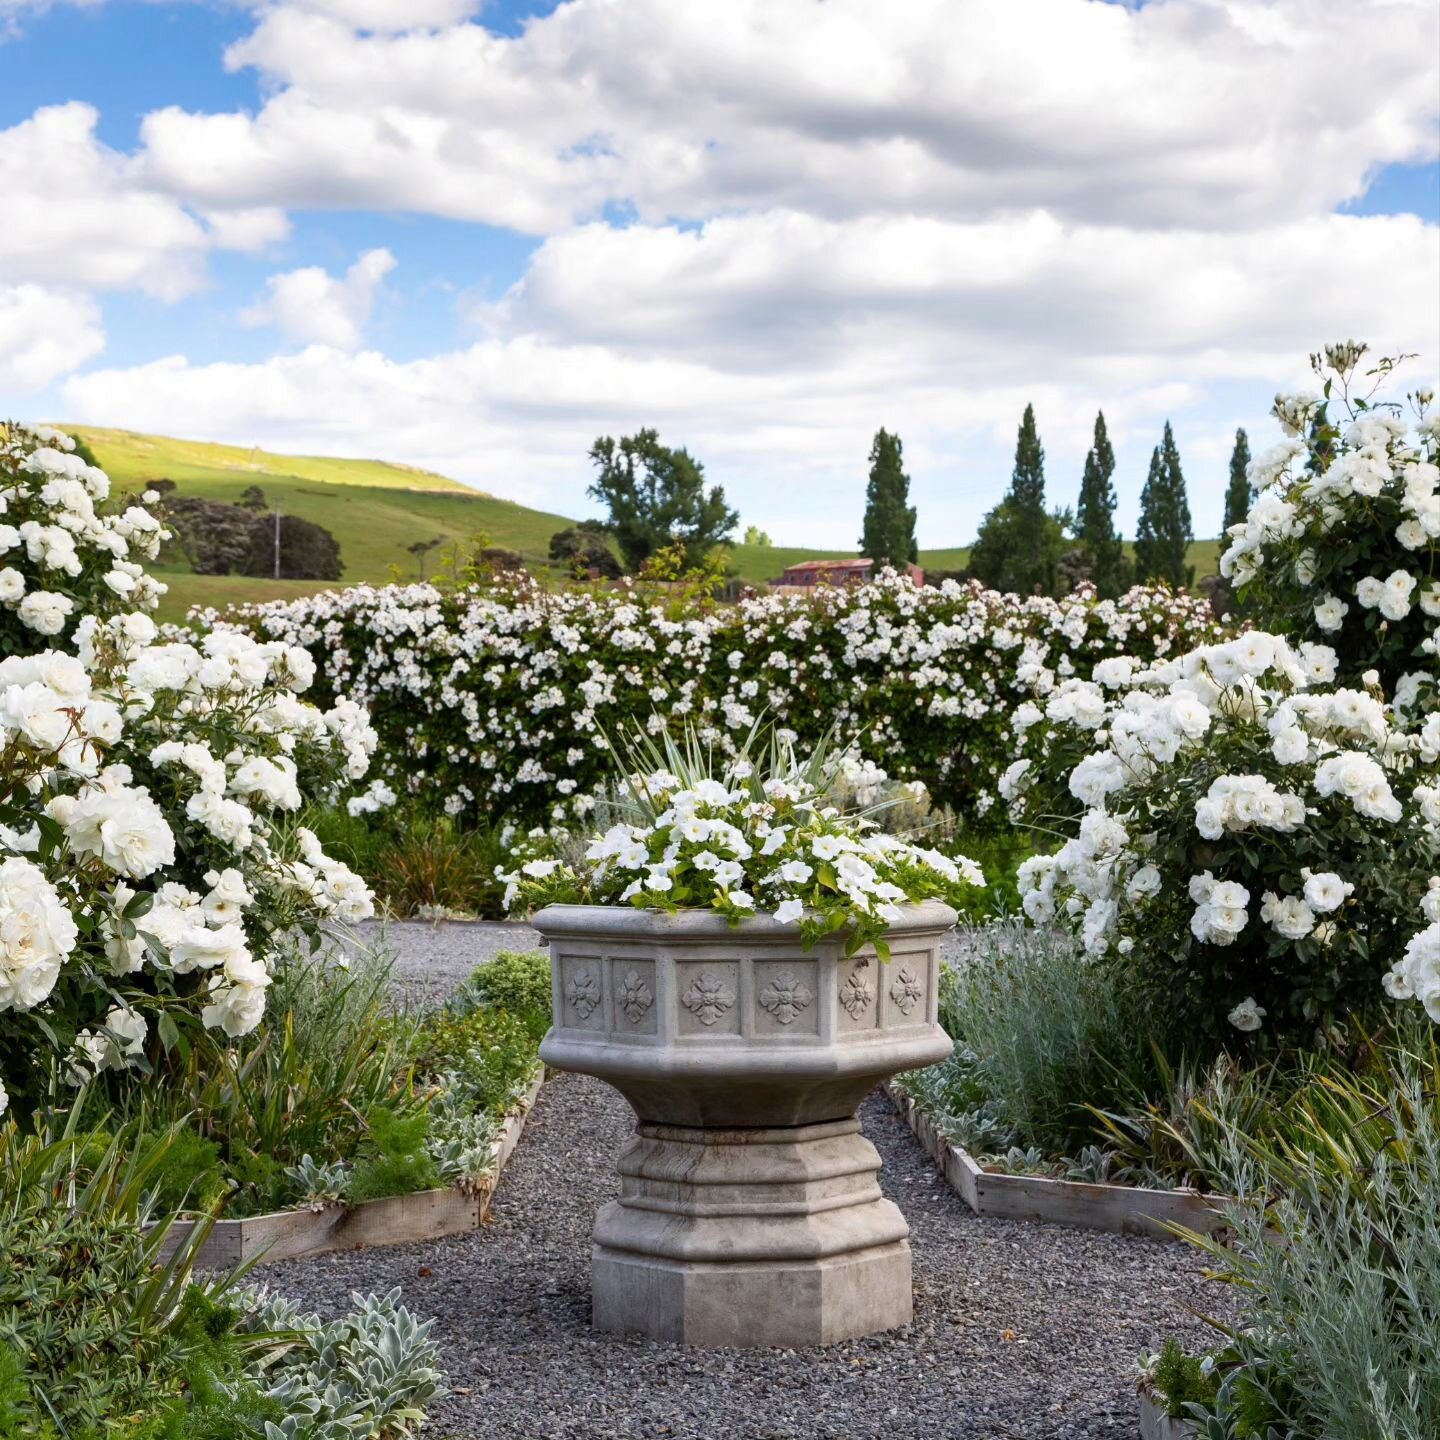 Longbush Cottage 🪻

Located in the beautiful central Wairarapa, only 15 minutes from Martinborough and Carterton, is a flower-filled cottage garden. Surrounding the 1890s cottage on a sprawling hectare of land, is a garden divided into vibrant rooms